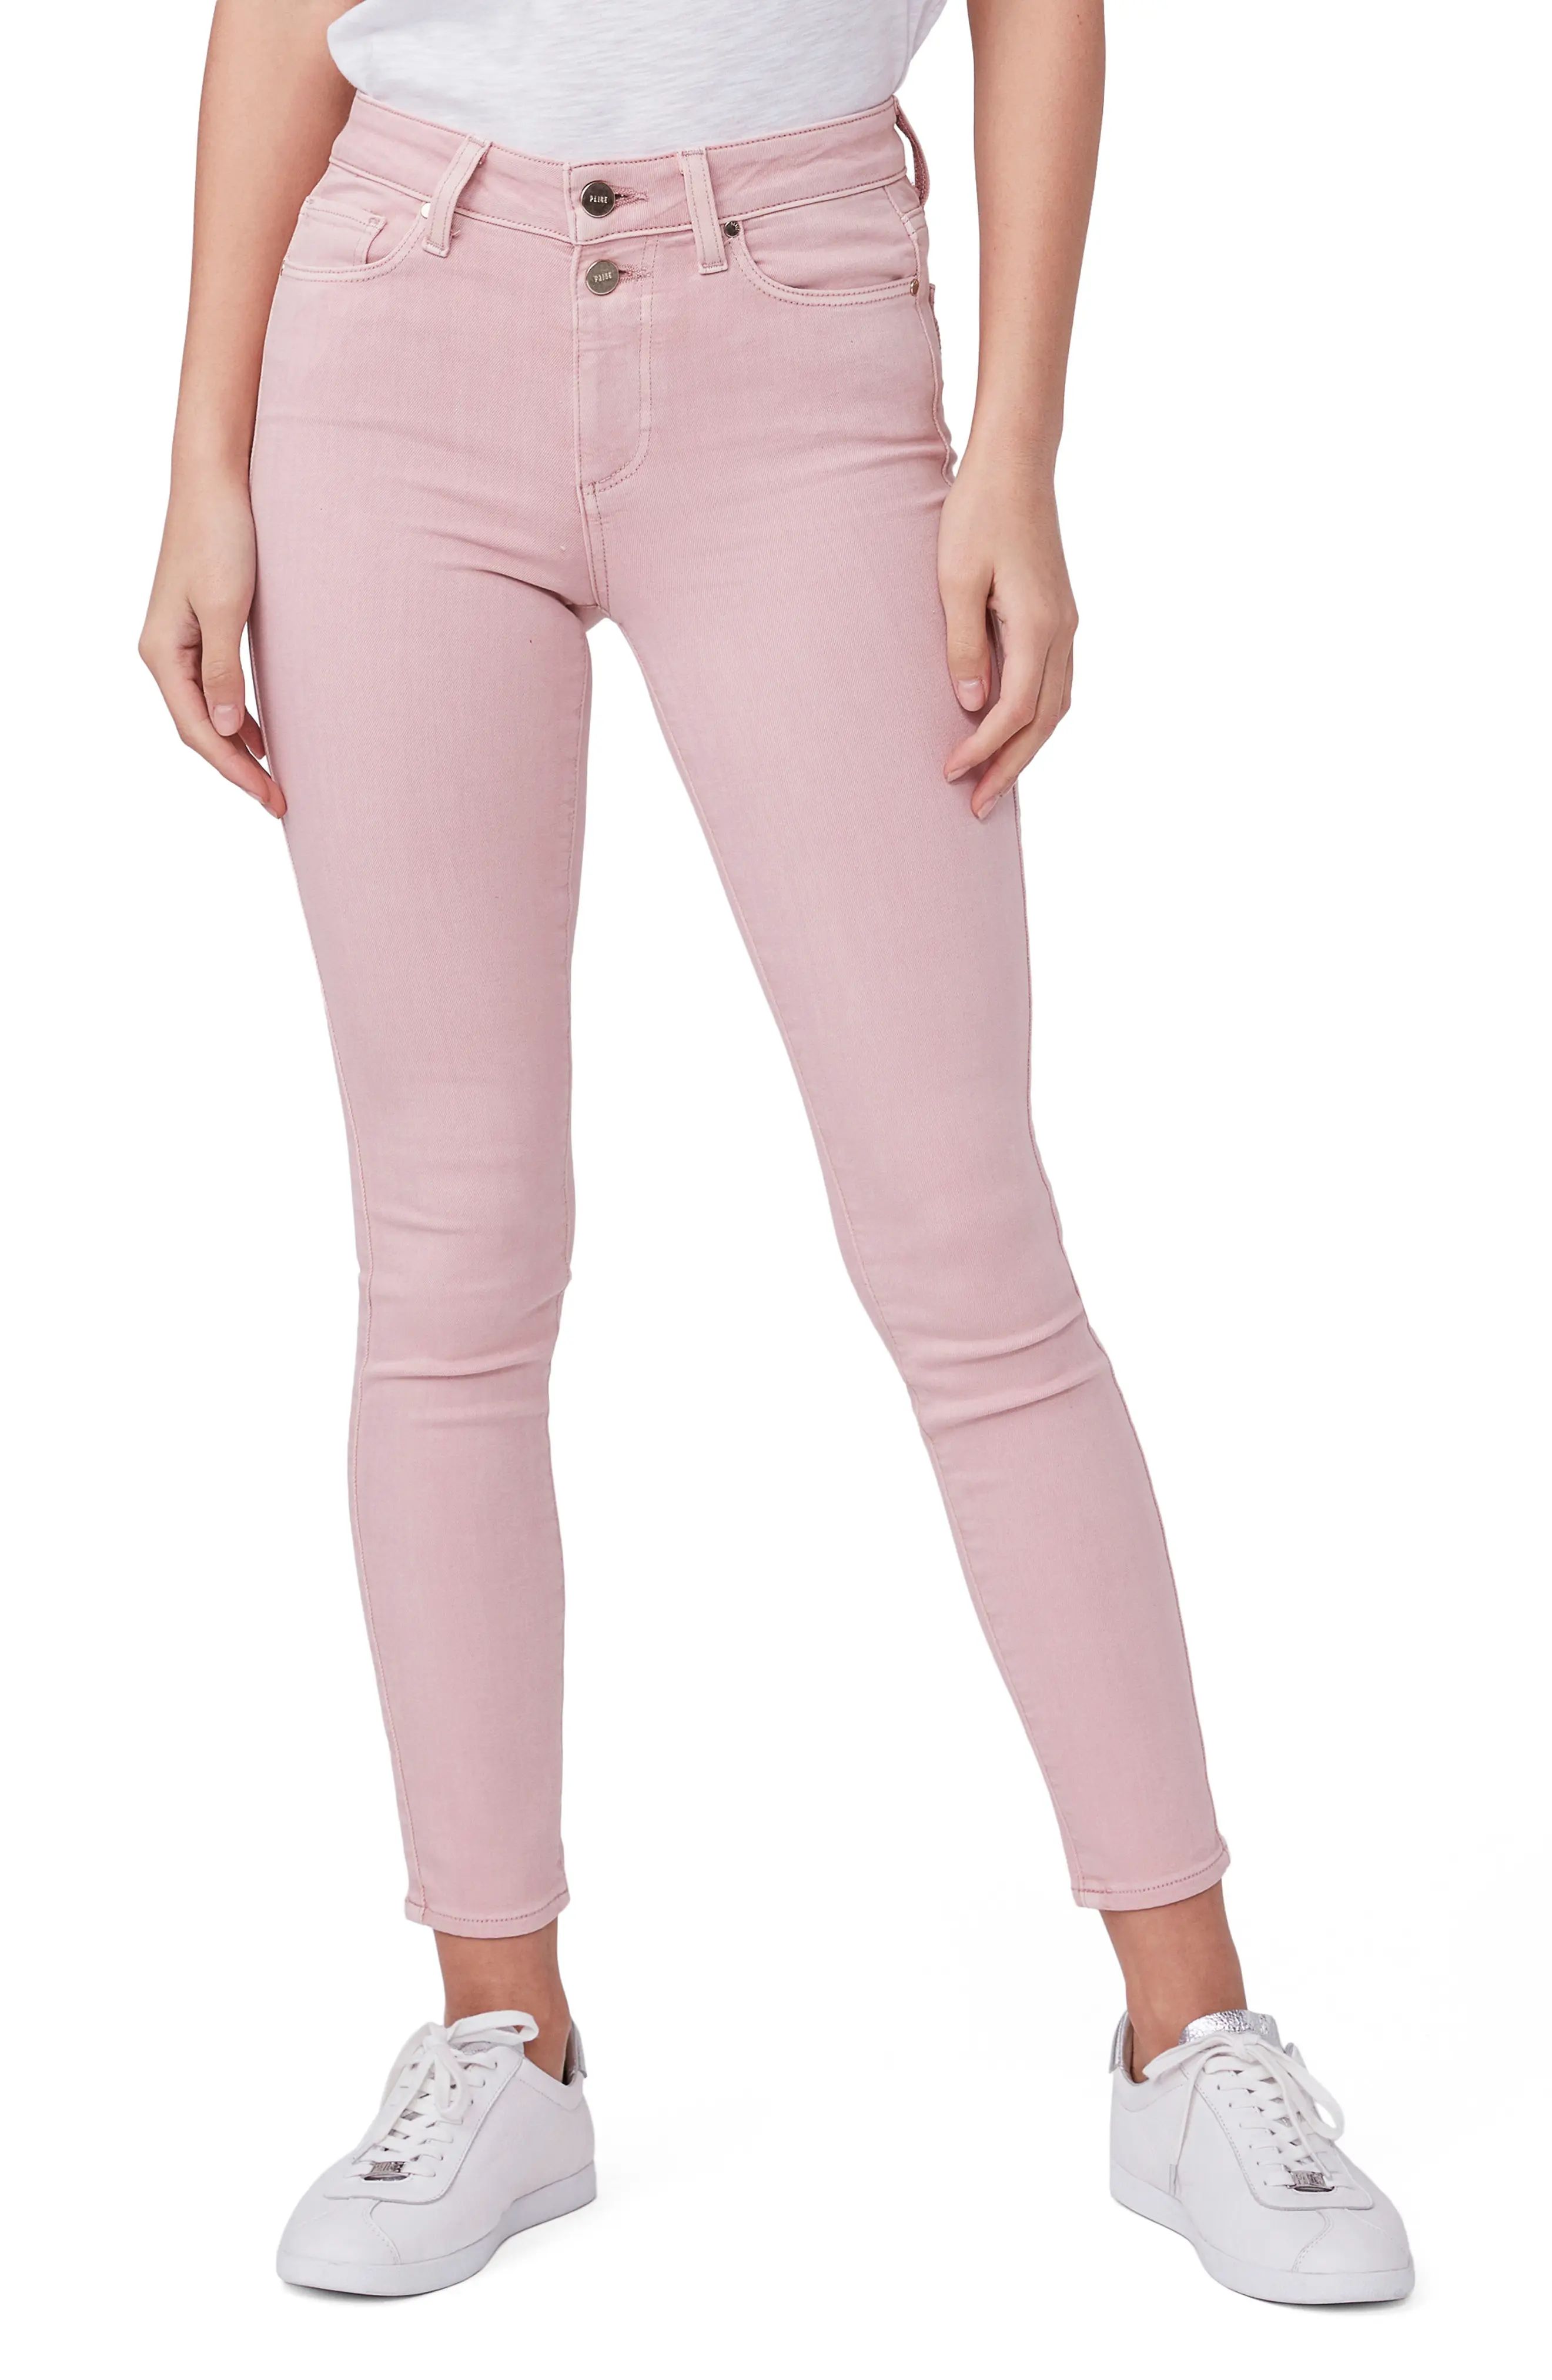 Women's Paige Hoxton High Waist Ankle Skinny Jeans, Size 28 - Pink | Nordstrom